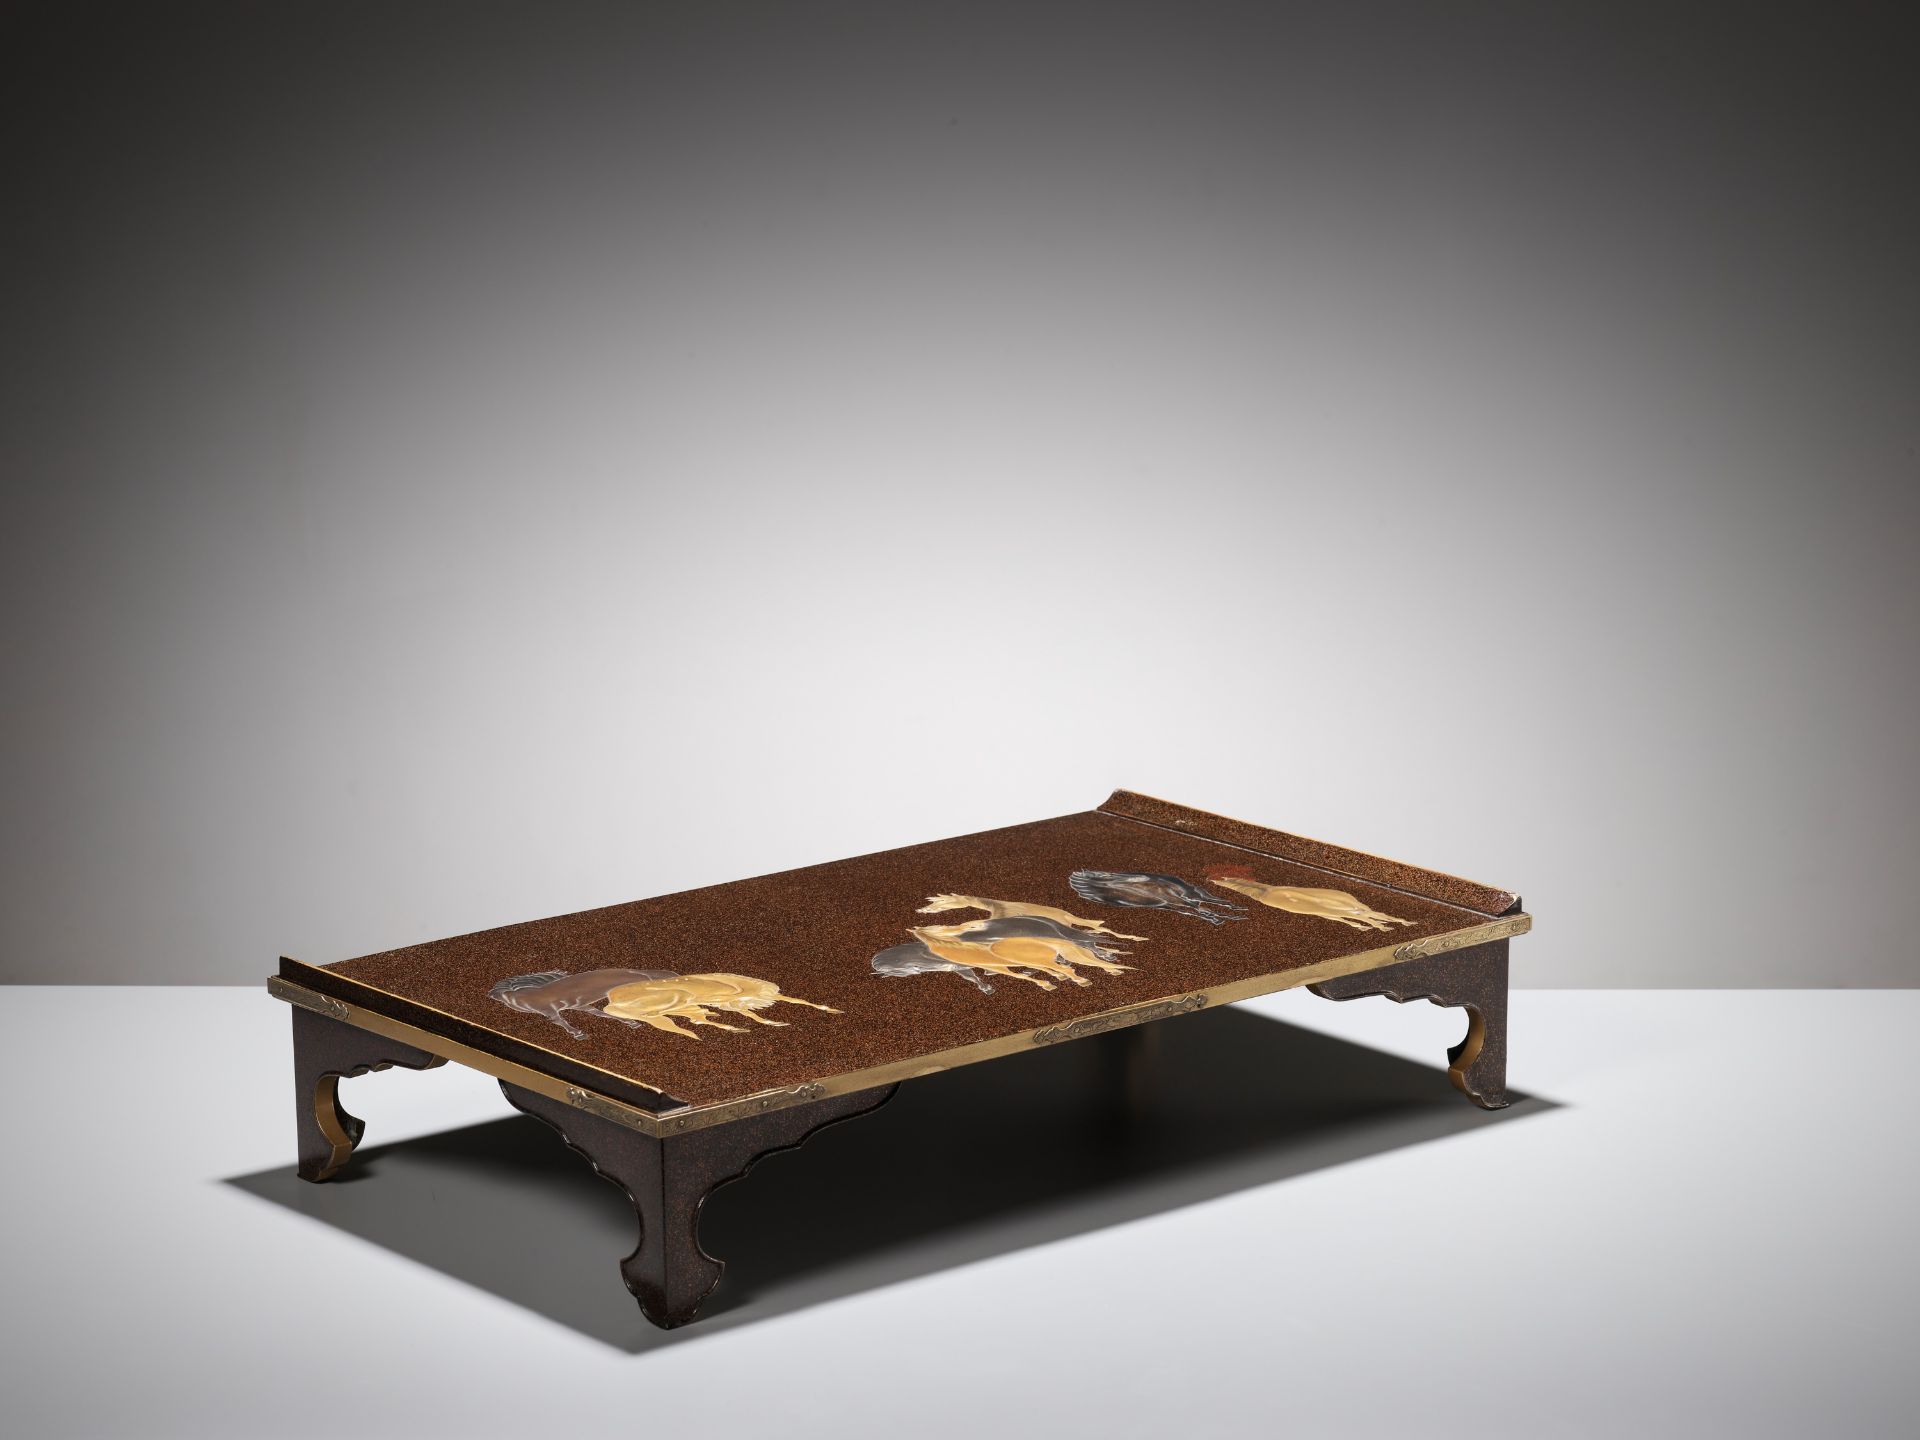 A RARE AND FINE LACQUER BUNDAI (WRITING TABLE) WITH SEVEN HORSES - Image 7 of 8